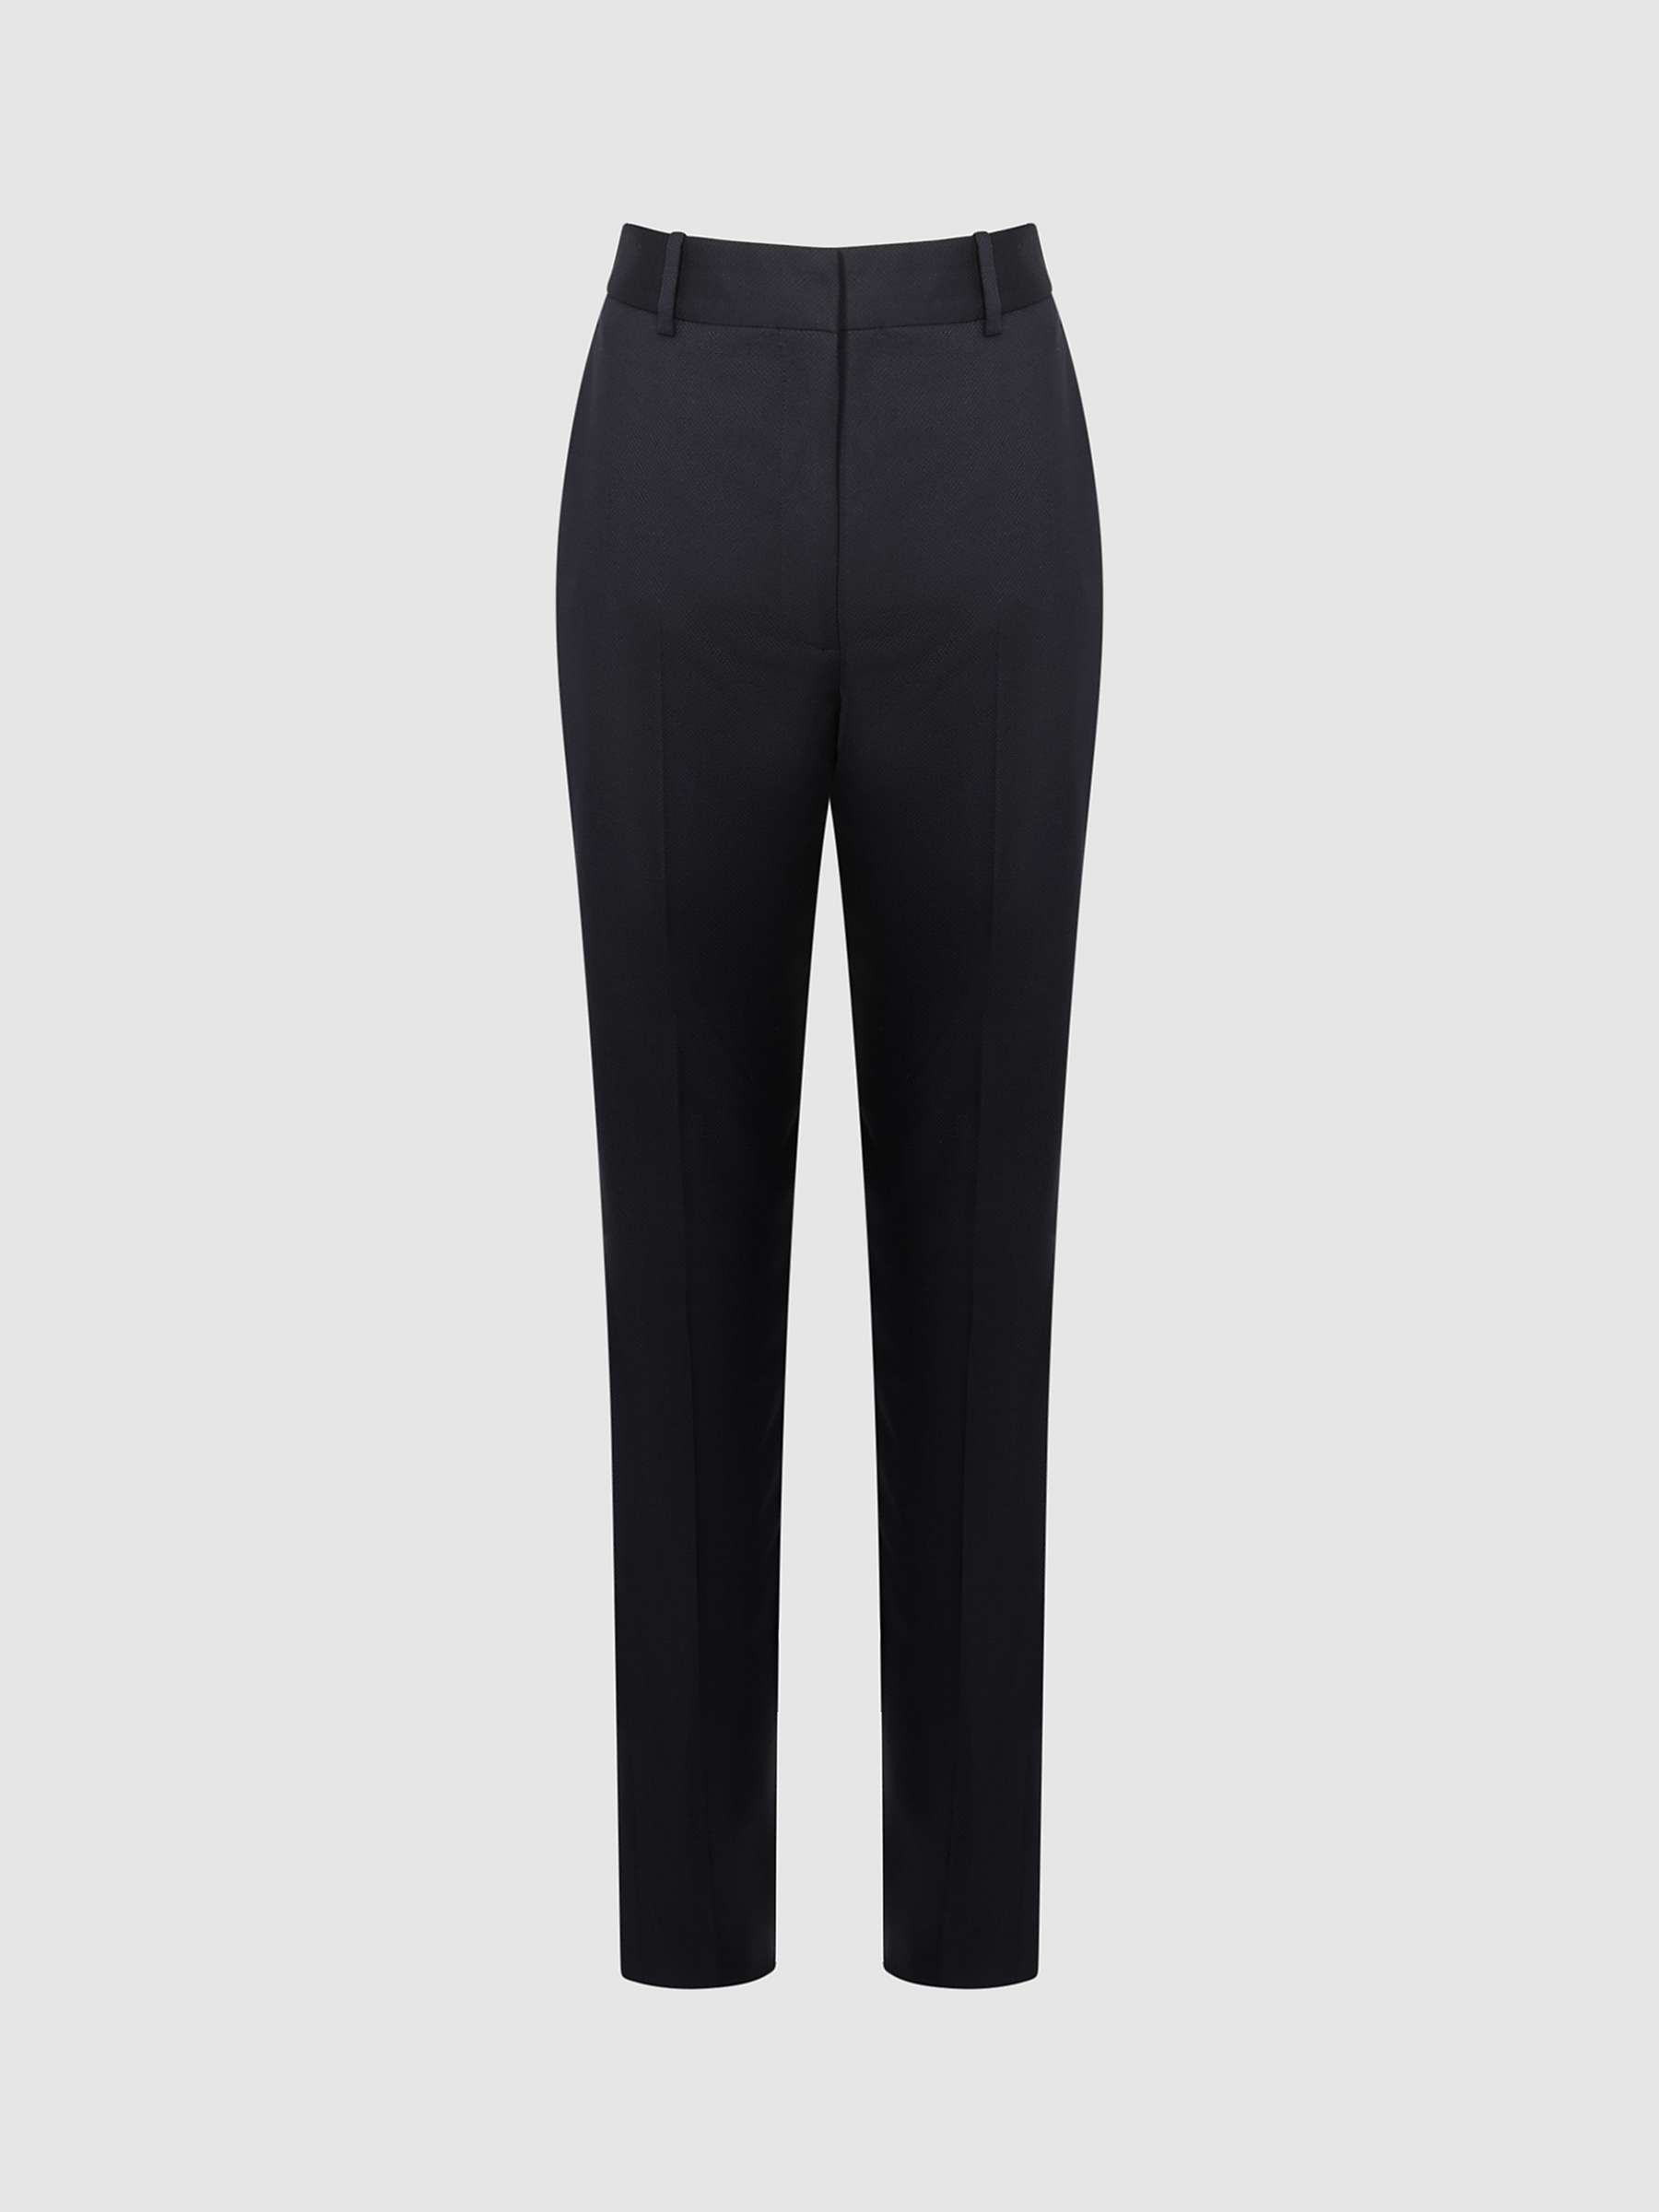 Buy Reiss Petite Haisley Wool Blend Tapered Trousers Online at johnlewis.com